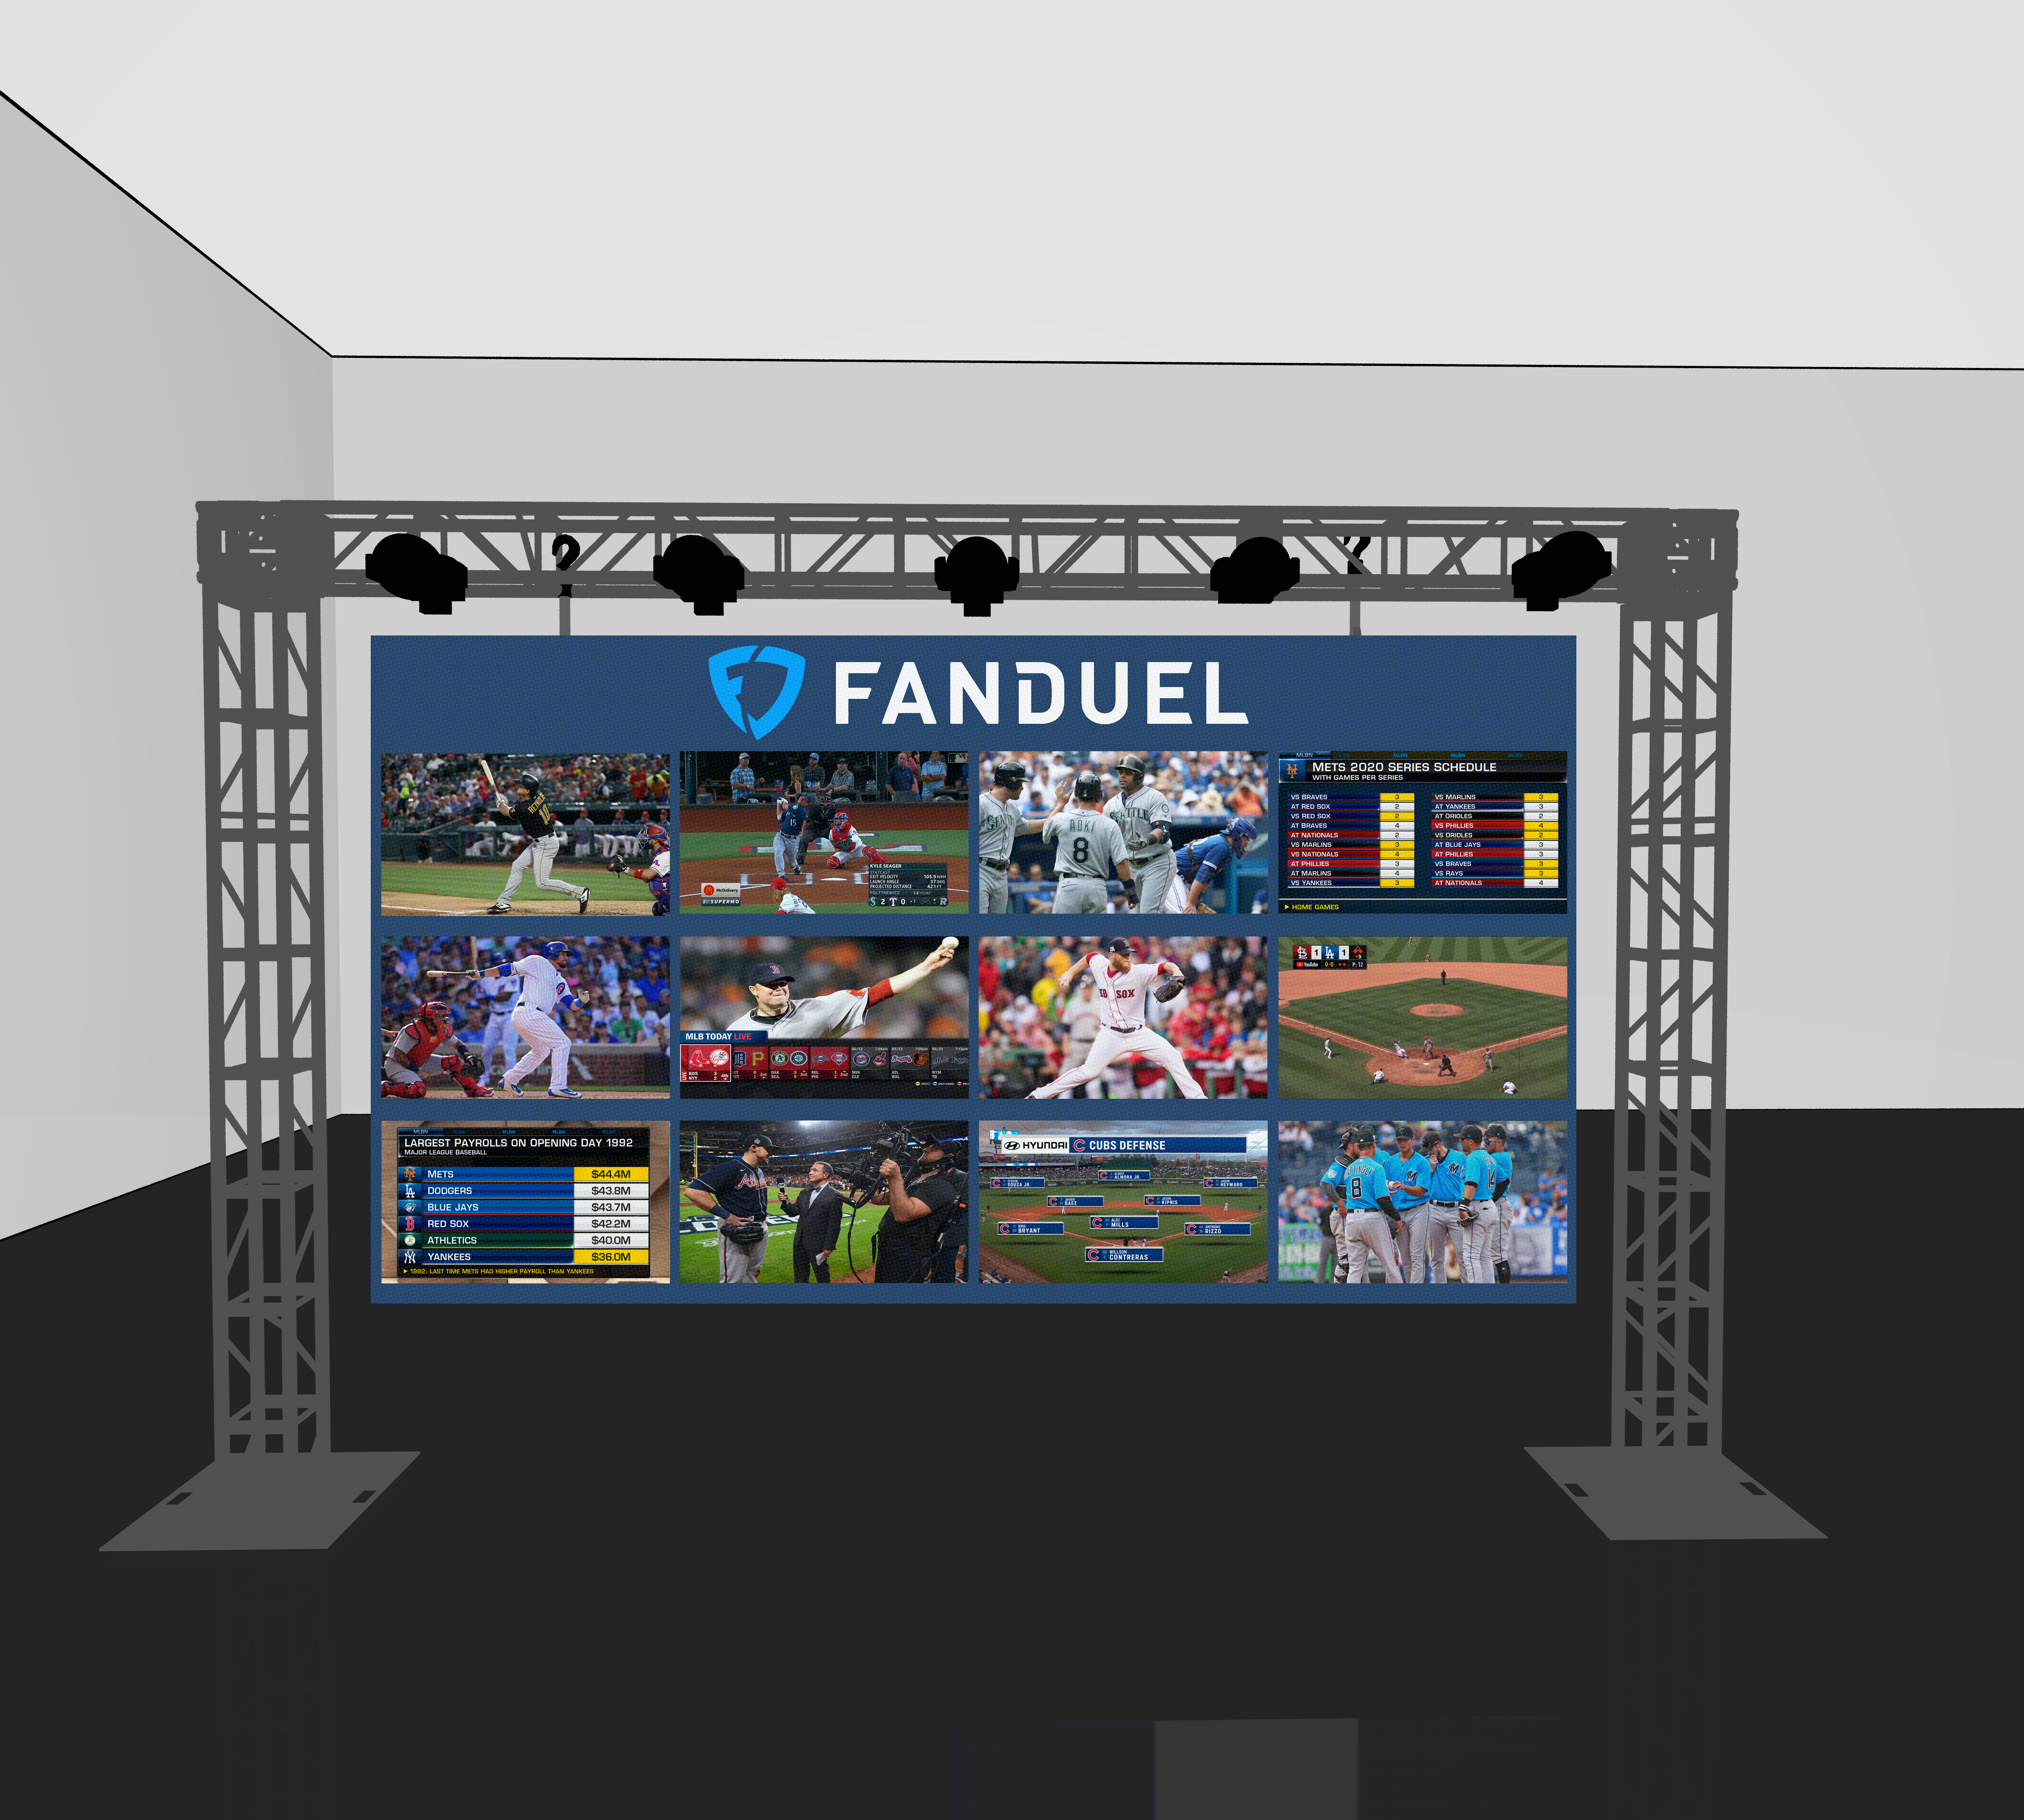 A rendering of the final FanDuel cube for the event in summer of 2022.